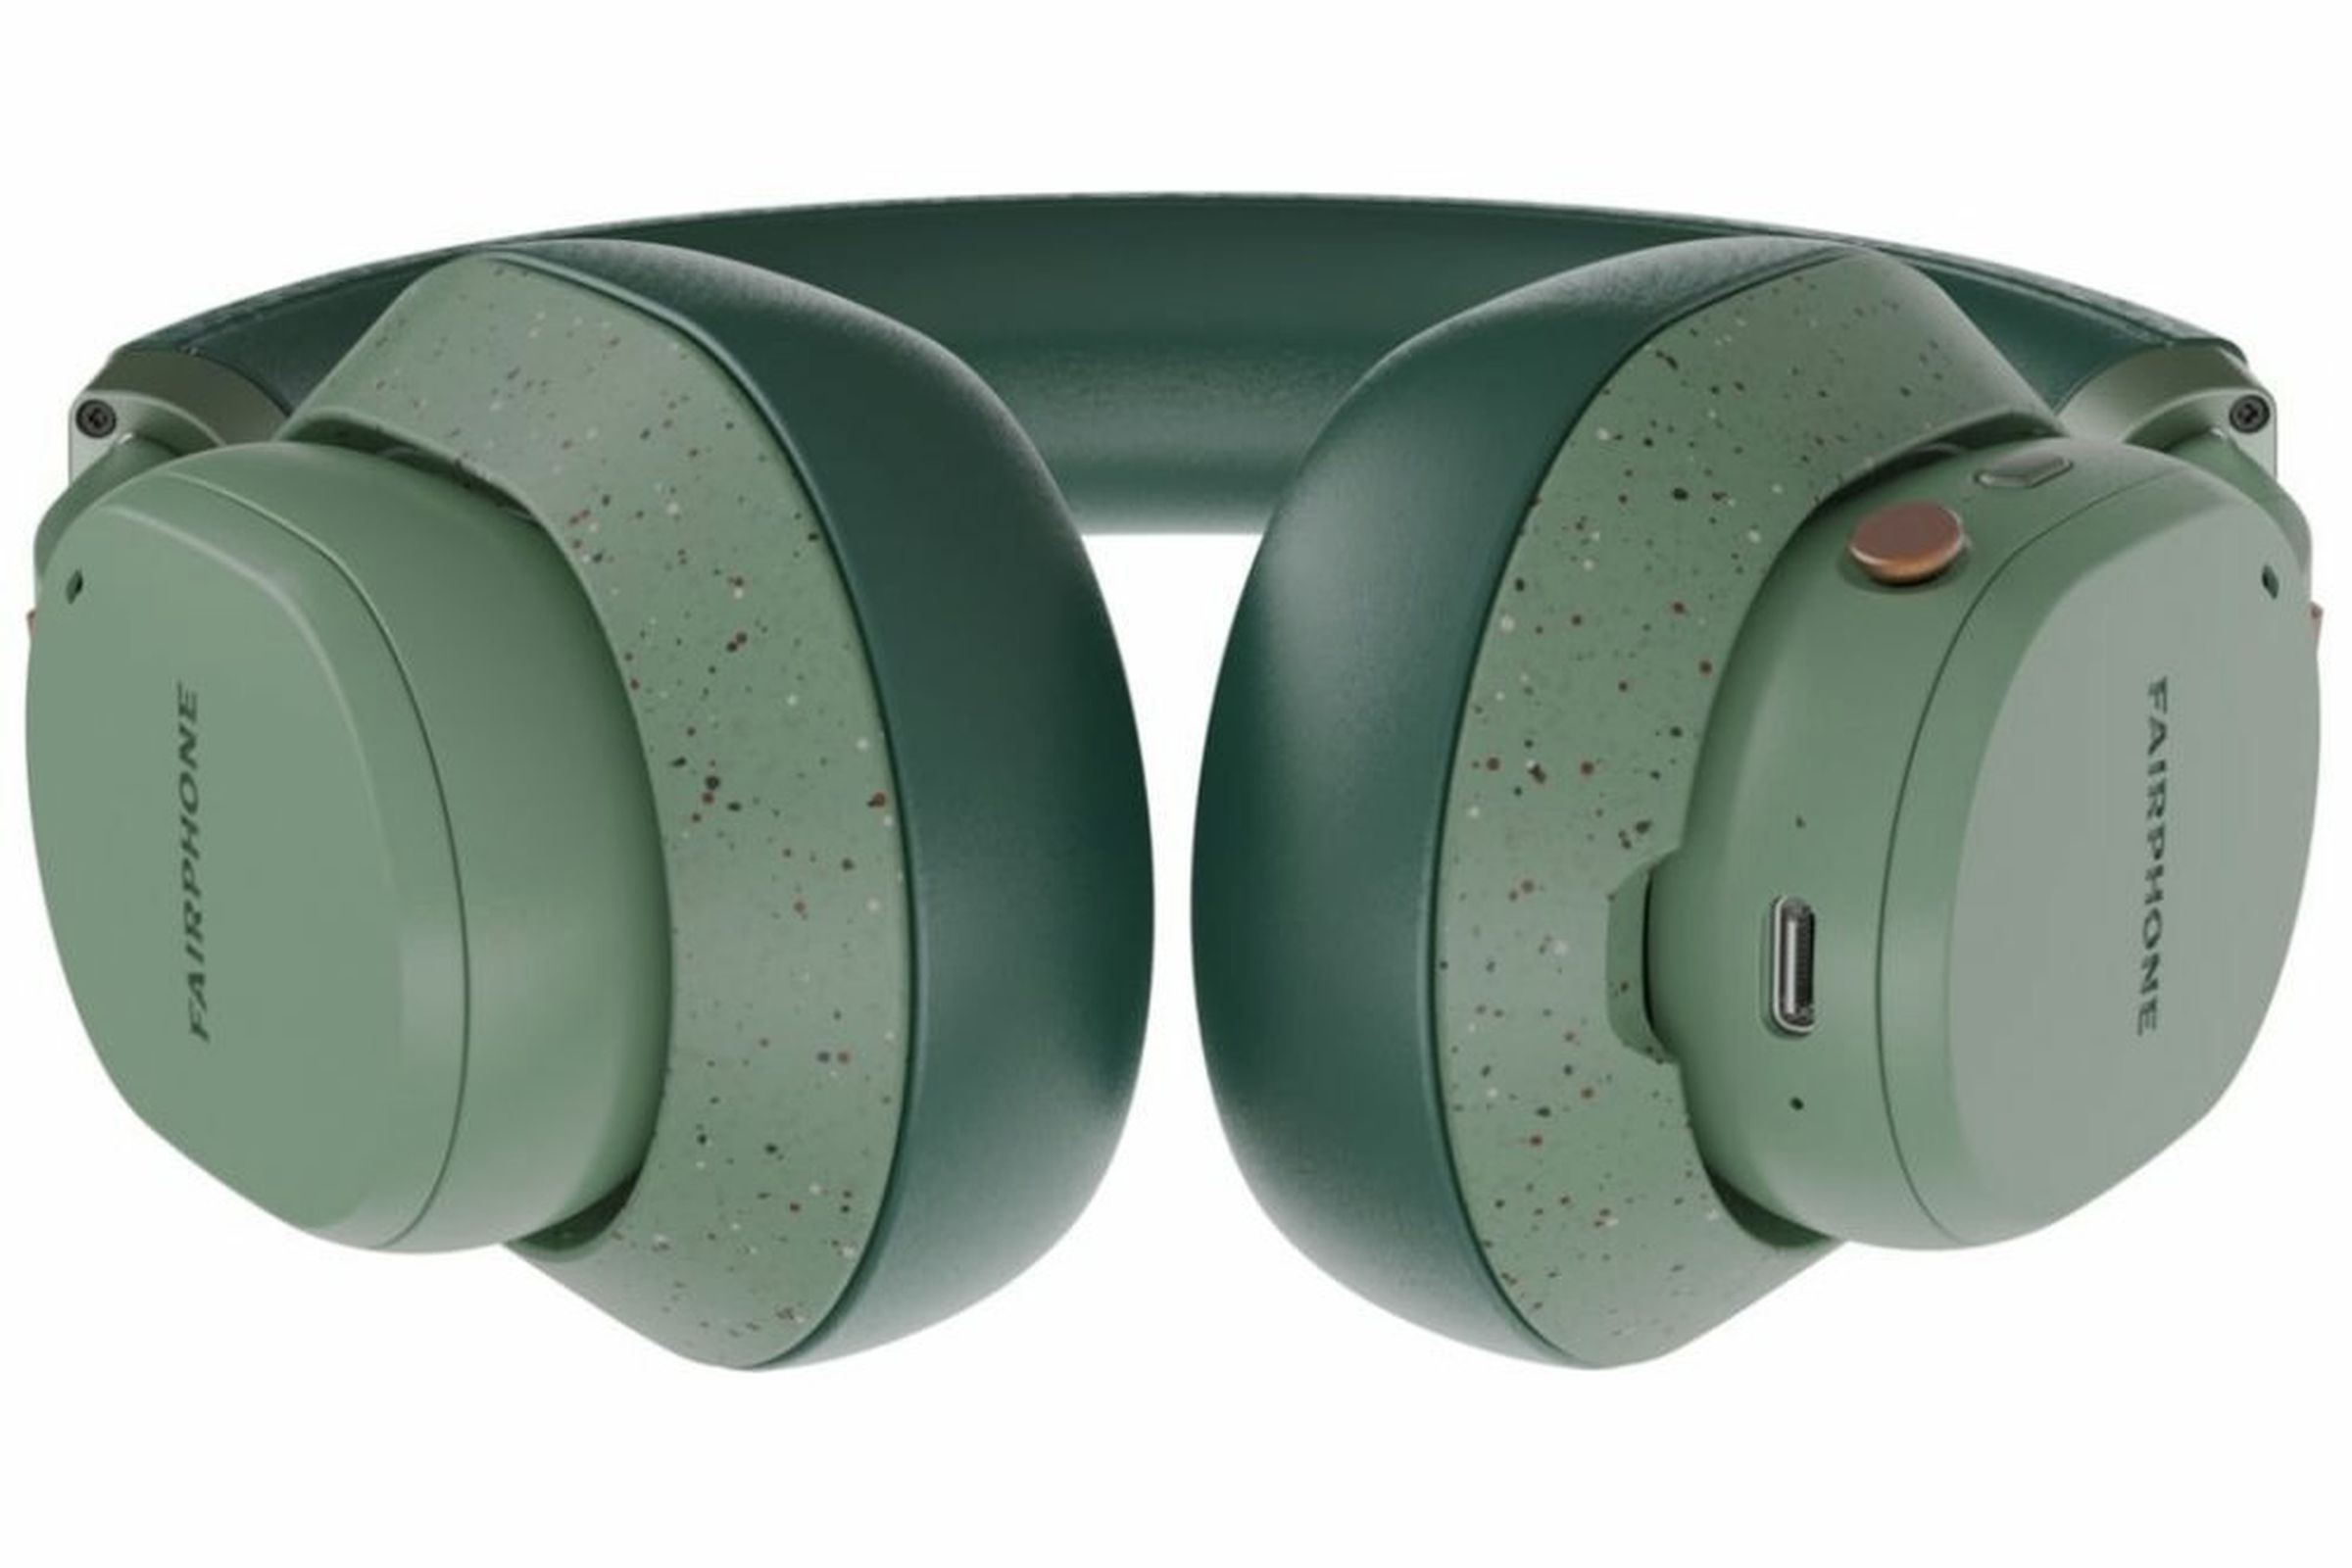 Green over-the-ear headphones with Fairphone logo on both cups, speckles in the plastic finish.